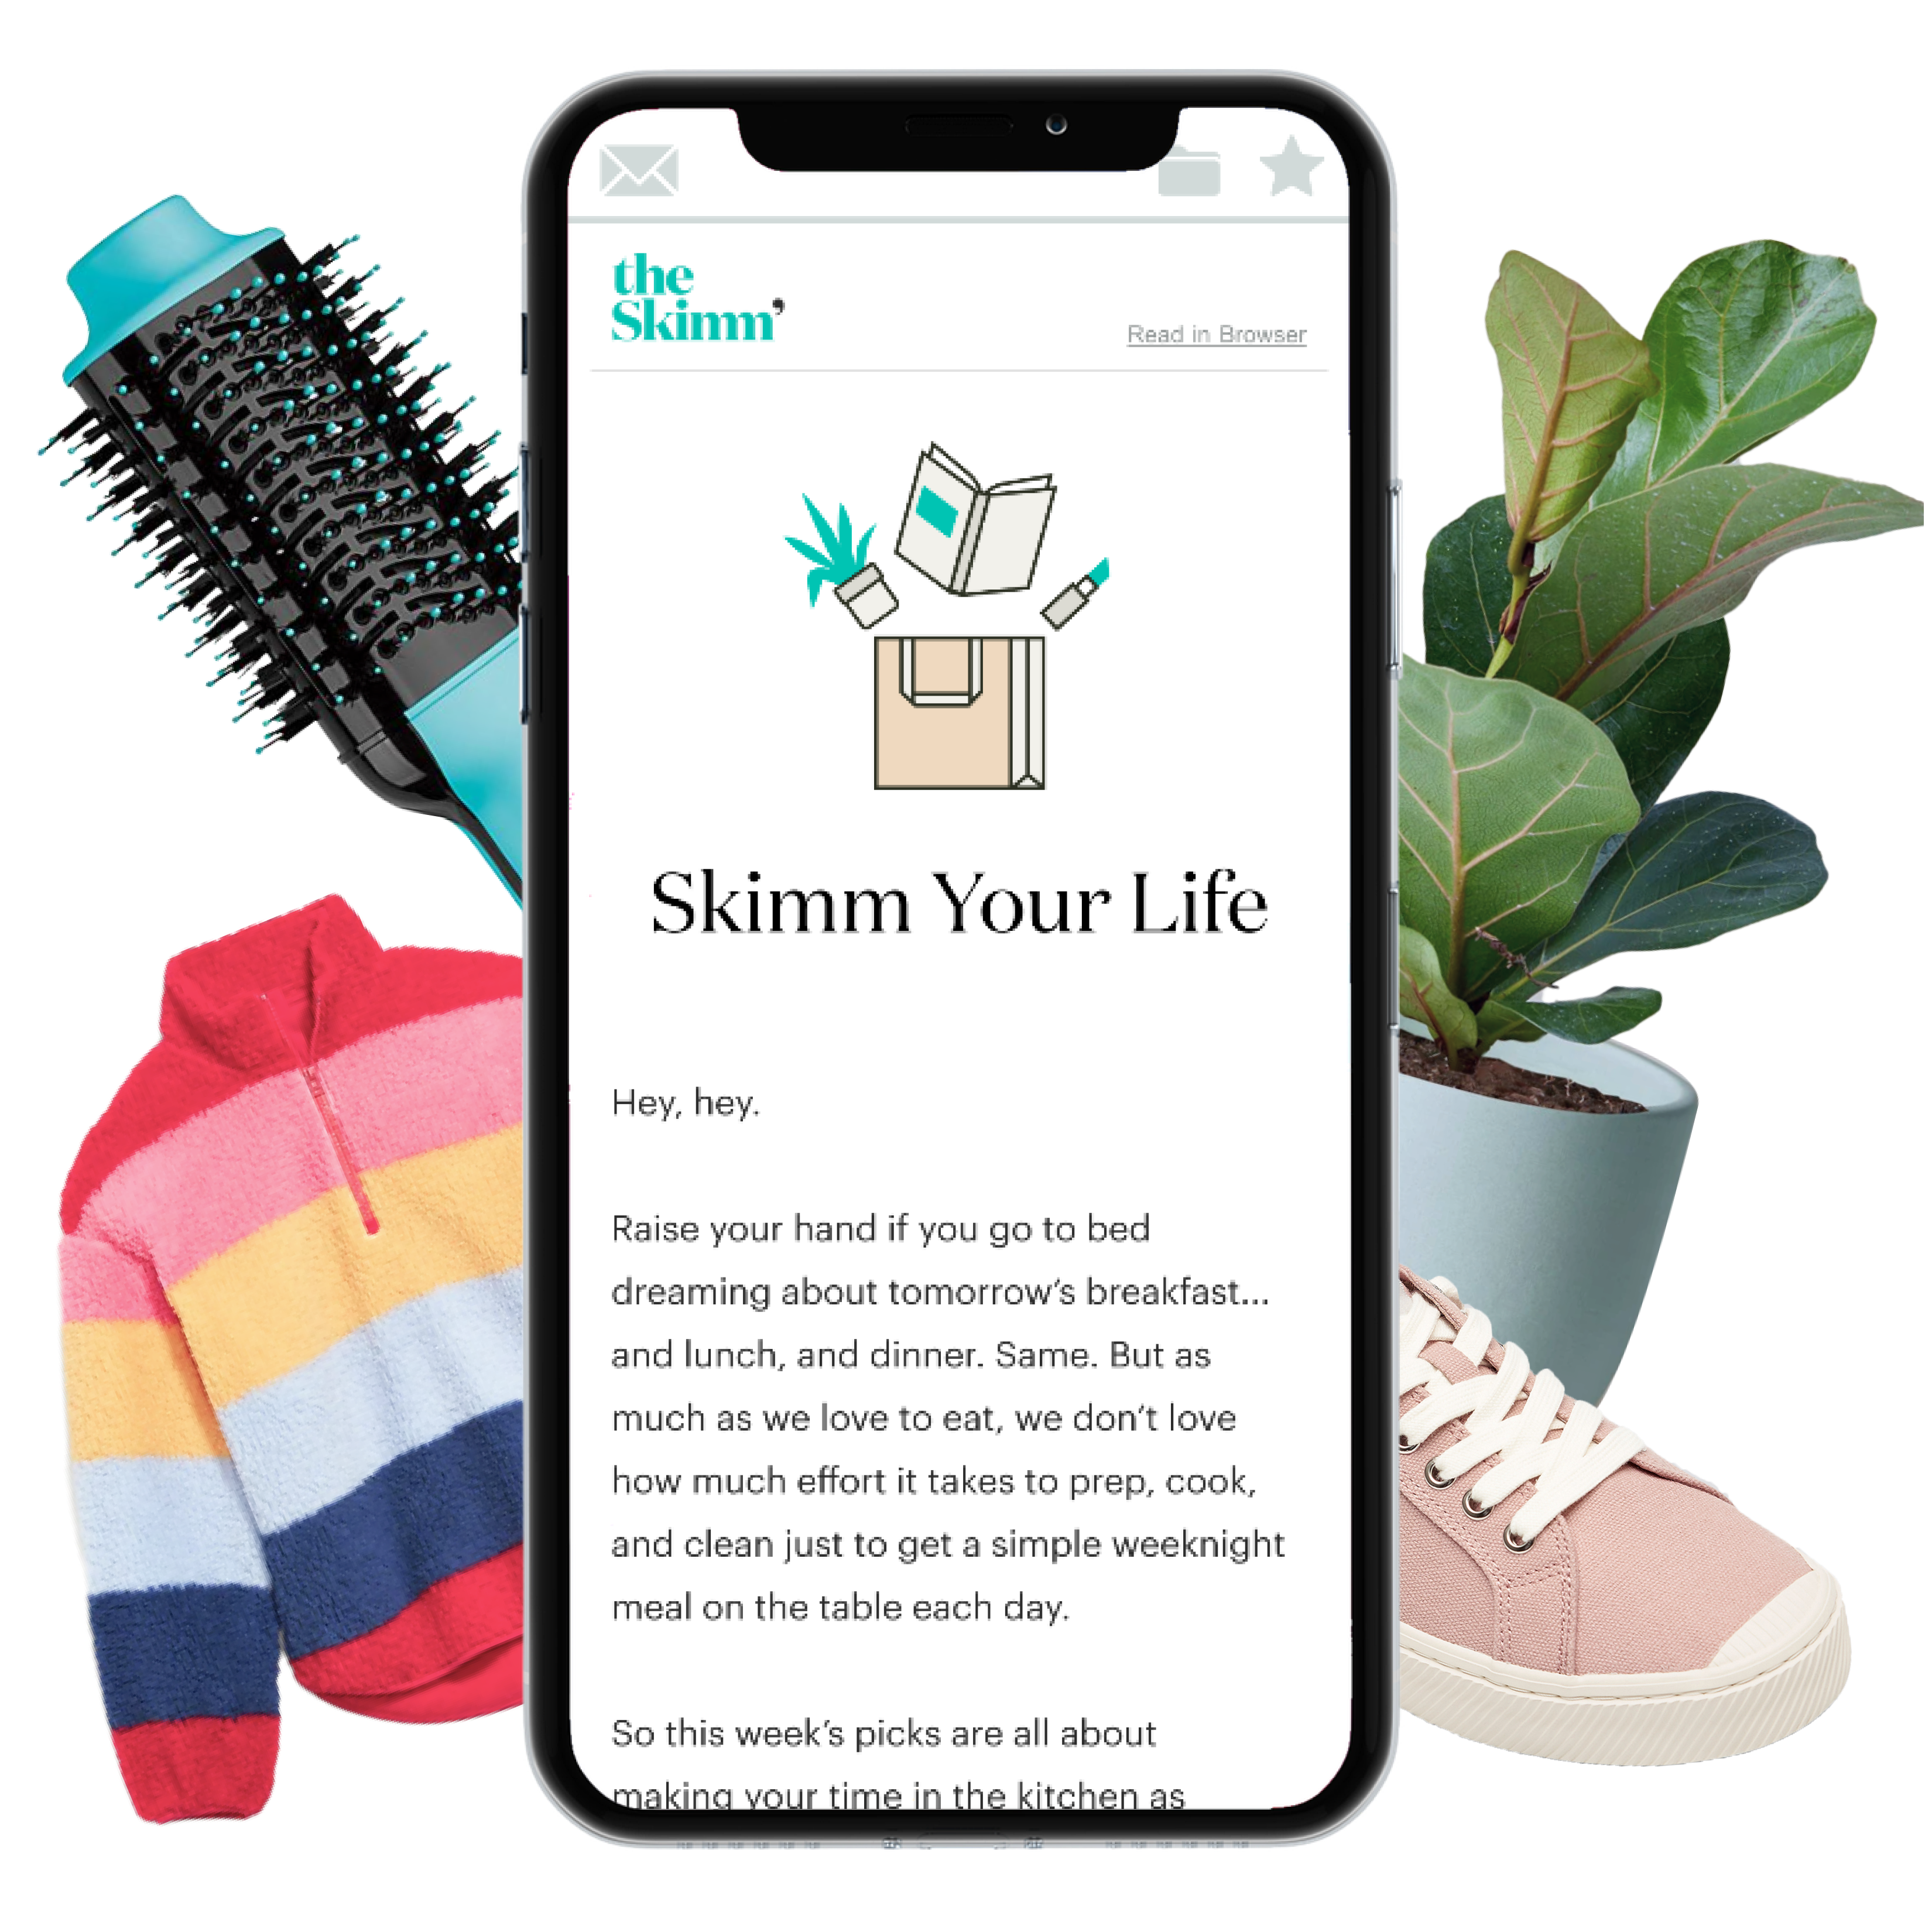 Skimm Your Life newsletter on phone